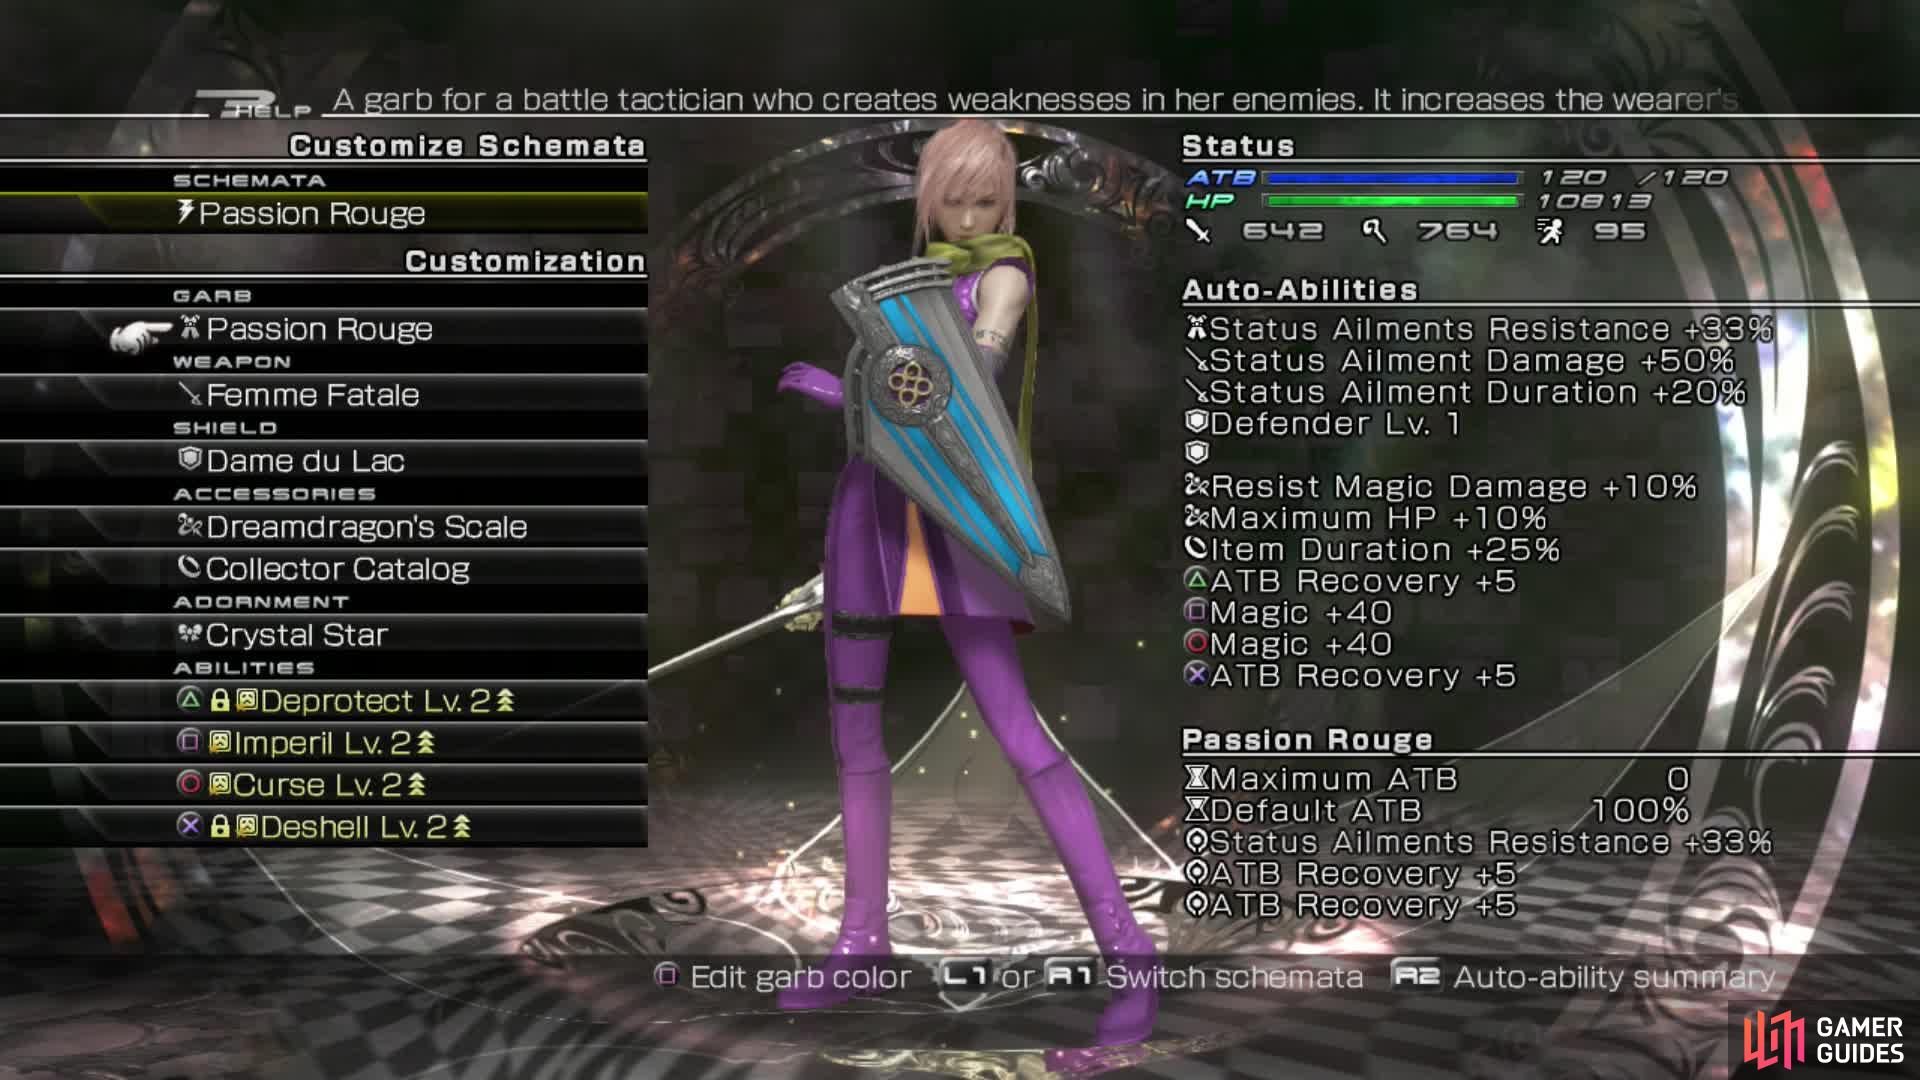 If you equip Femme Fatale you can easily debuff Caius and its innate status ailment resistance makes it essential.